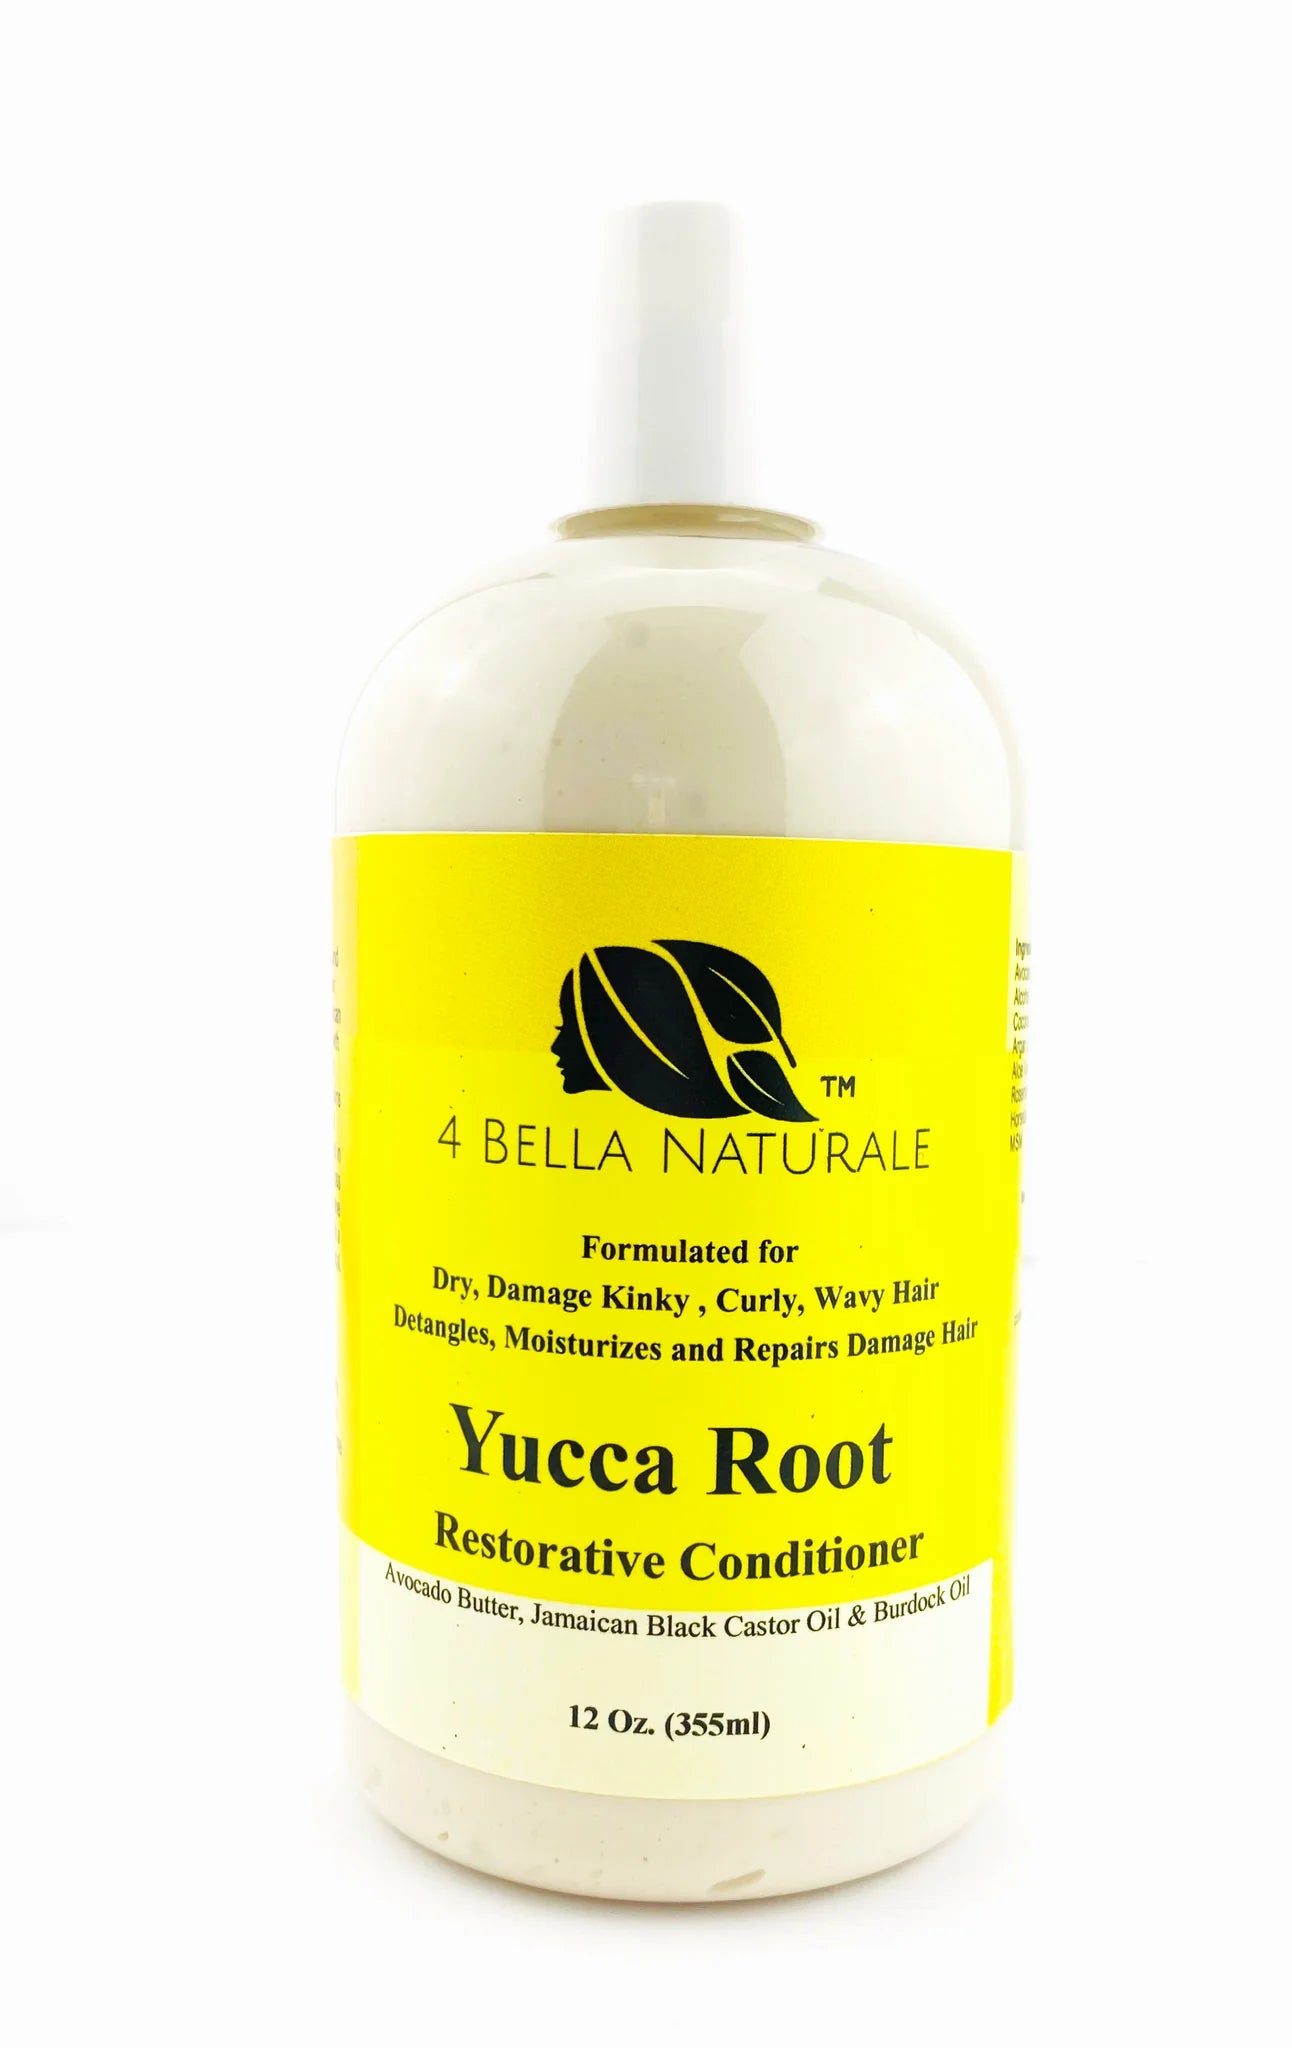 What Are The Benefits of Yucca?